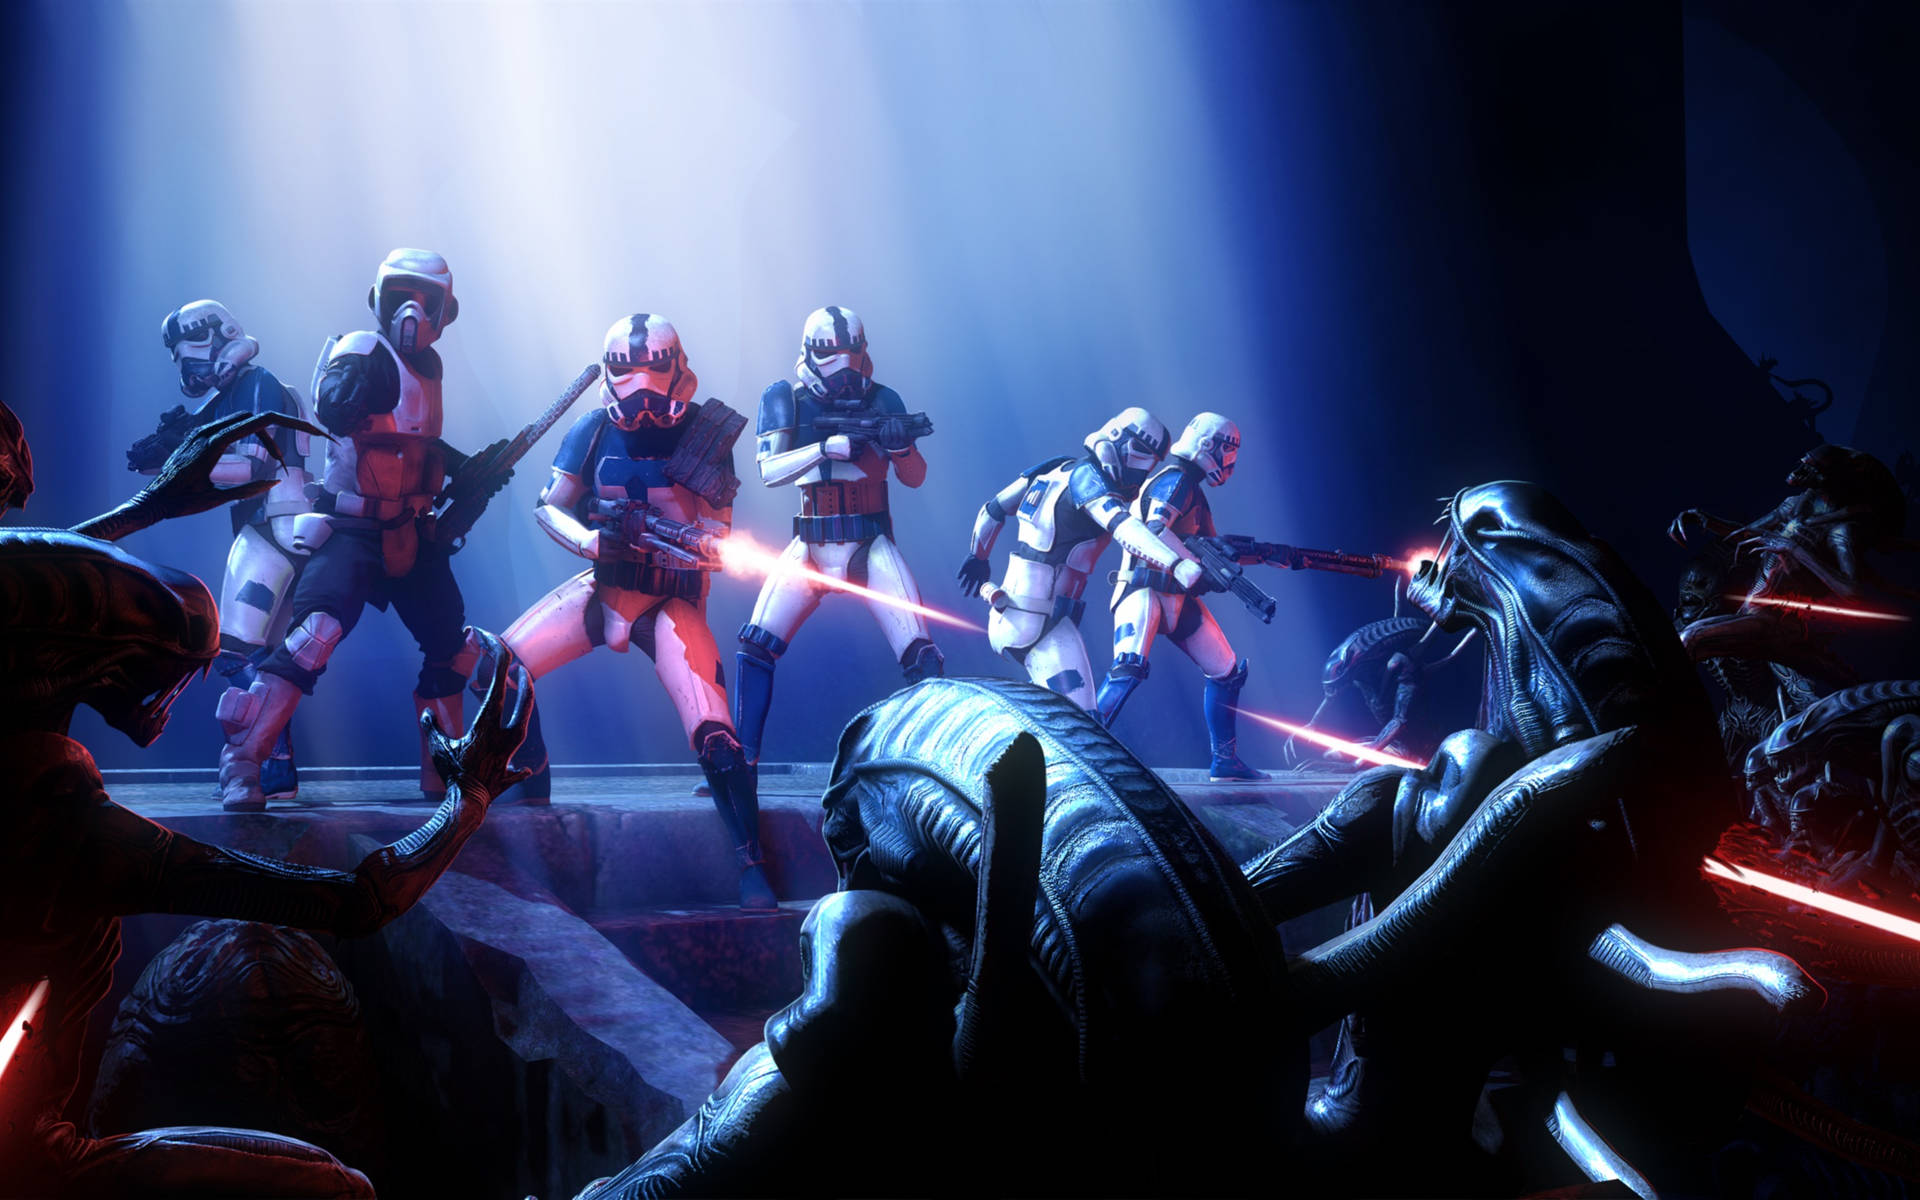 2560x1600 Star Wars Stormtroopers And Xenomorphs Wallpaper